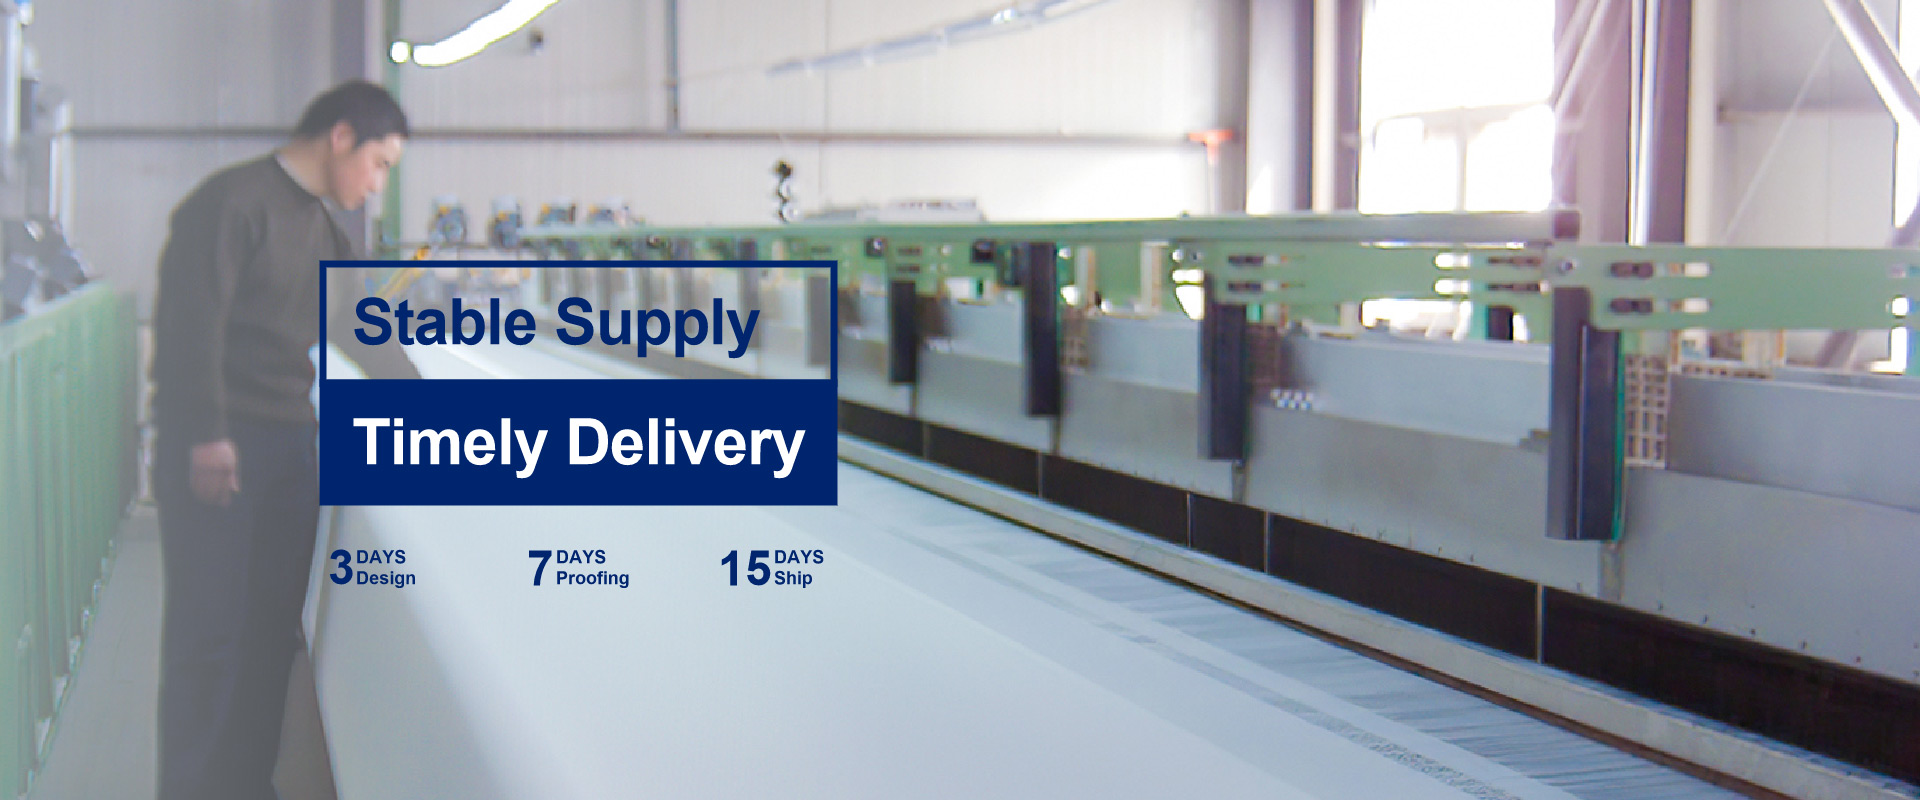 Stable Supply,Timely Delivery